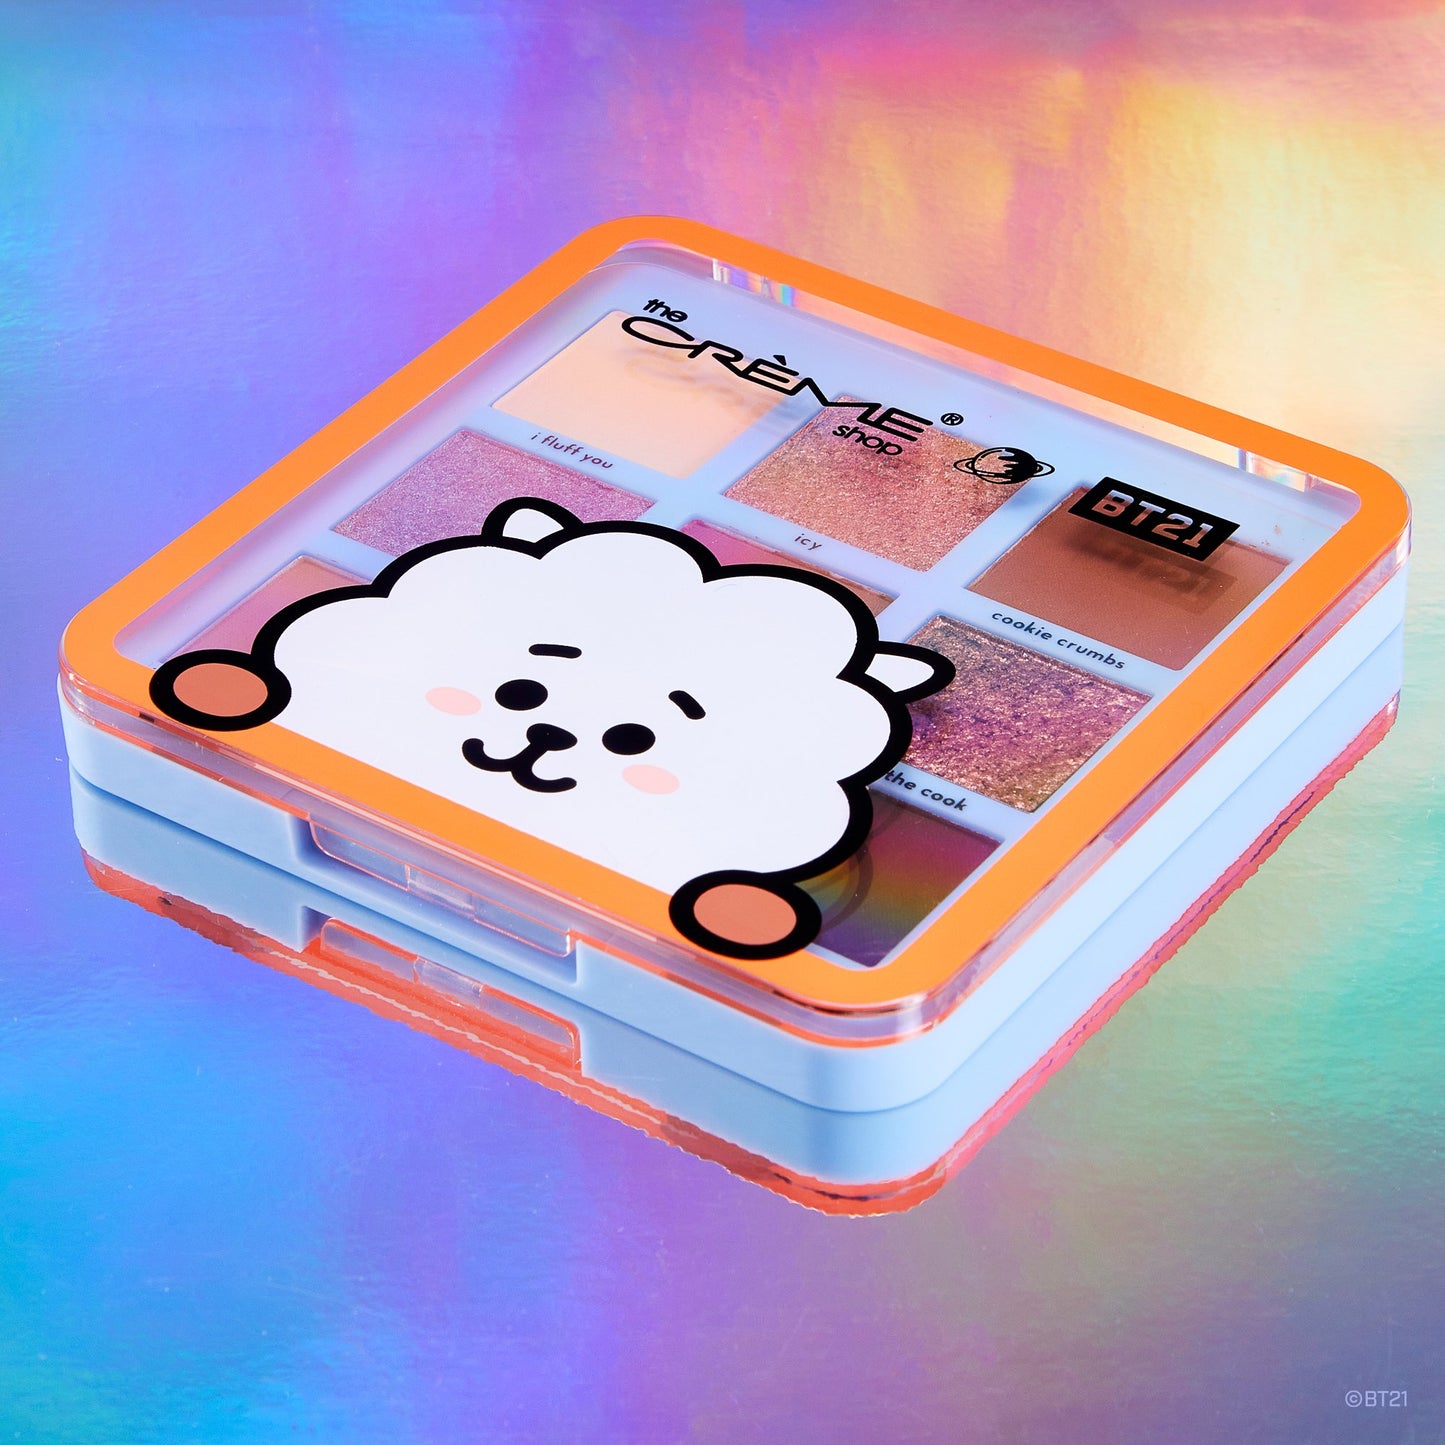 The Crème Shop | BT21: THE RIGHT FLUFF Eyeshadow Palette Eyeshadow Palette The Crème Shop x BT21 